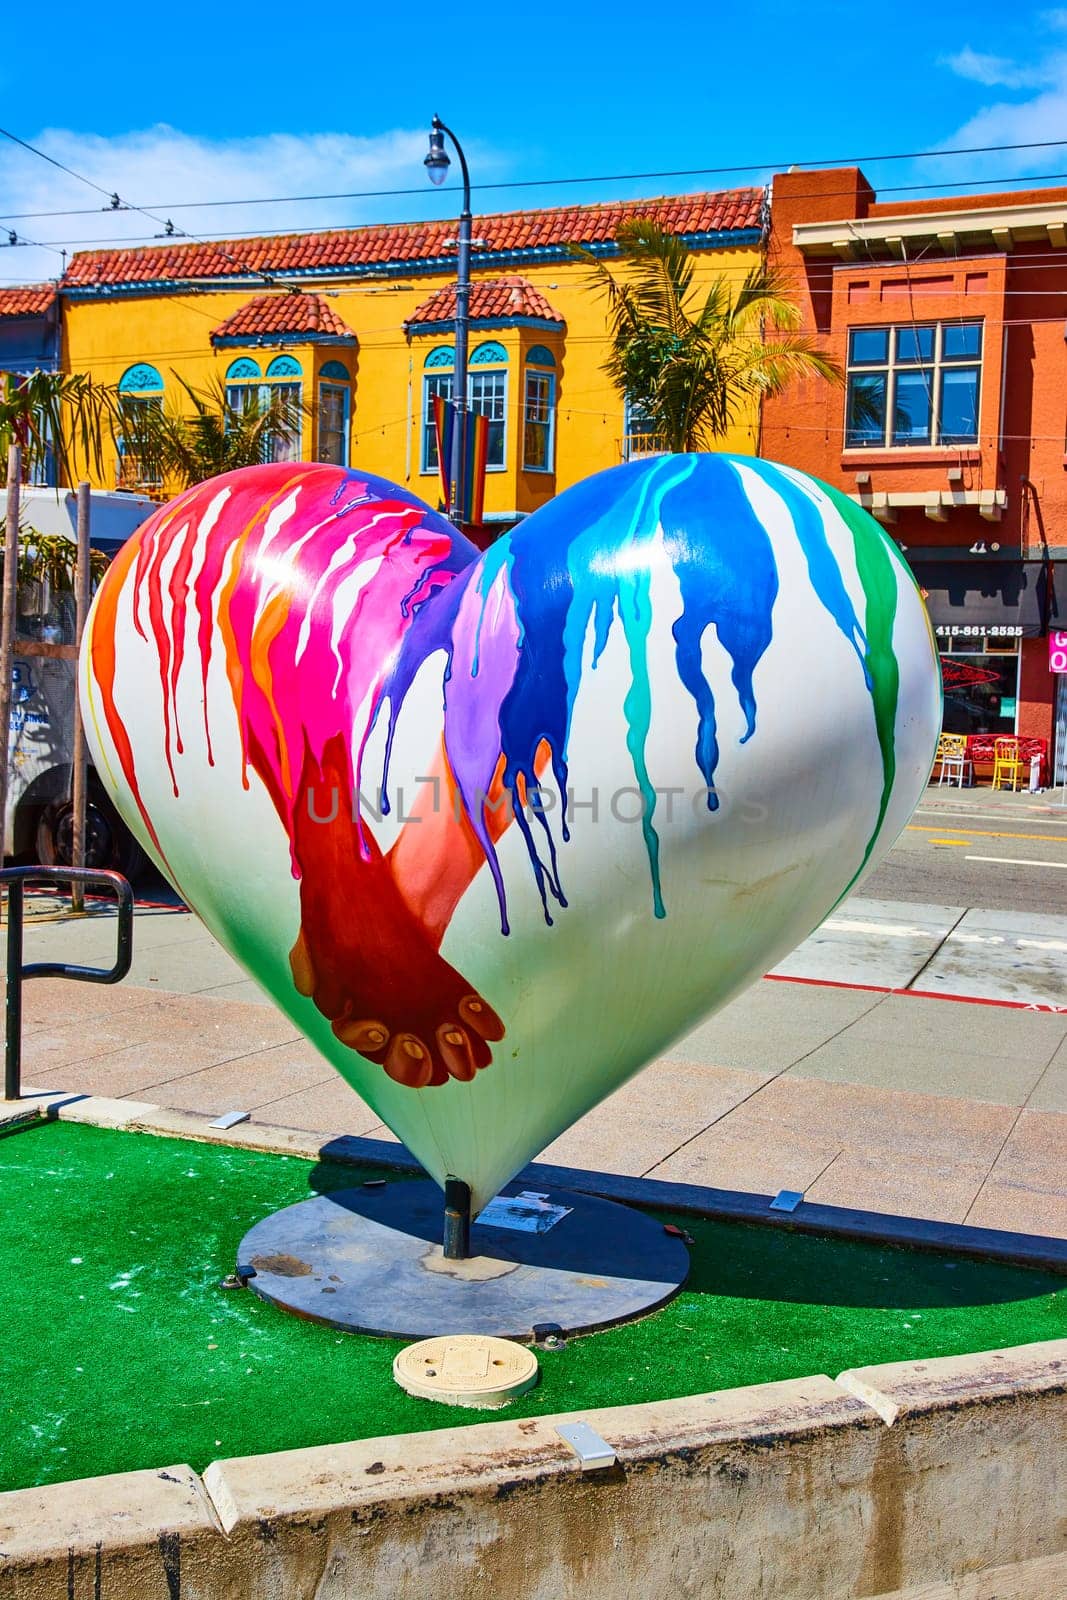 Image of Castro District heart sculpture with bright blue sky and buildings behind it